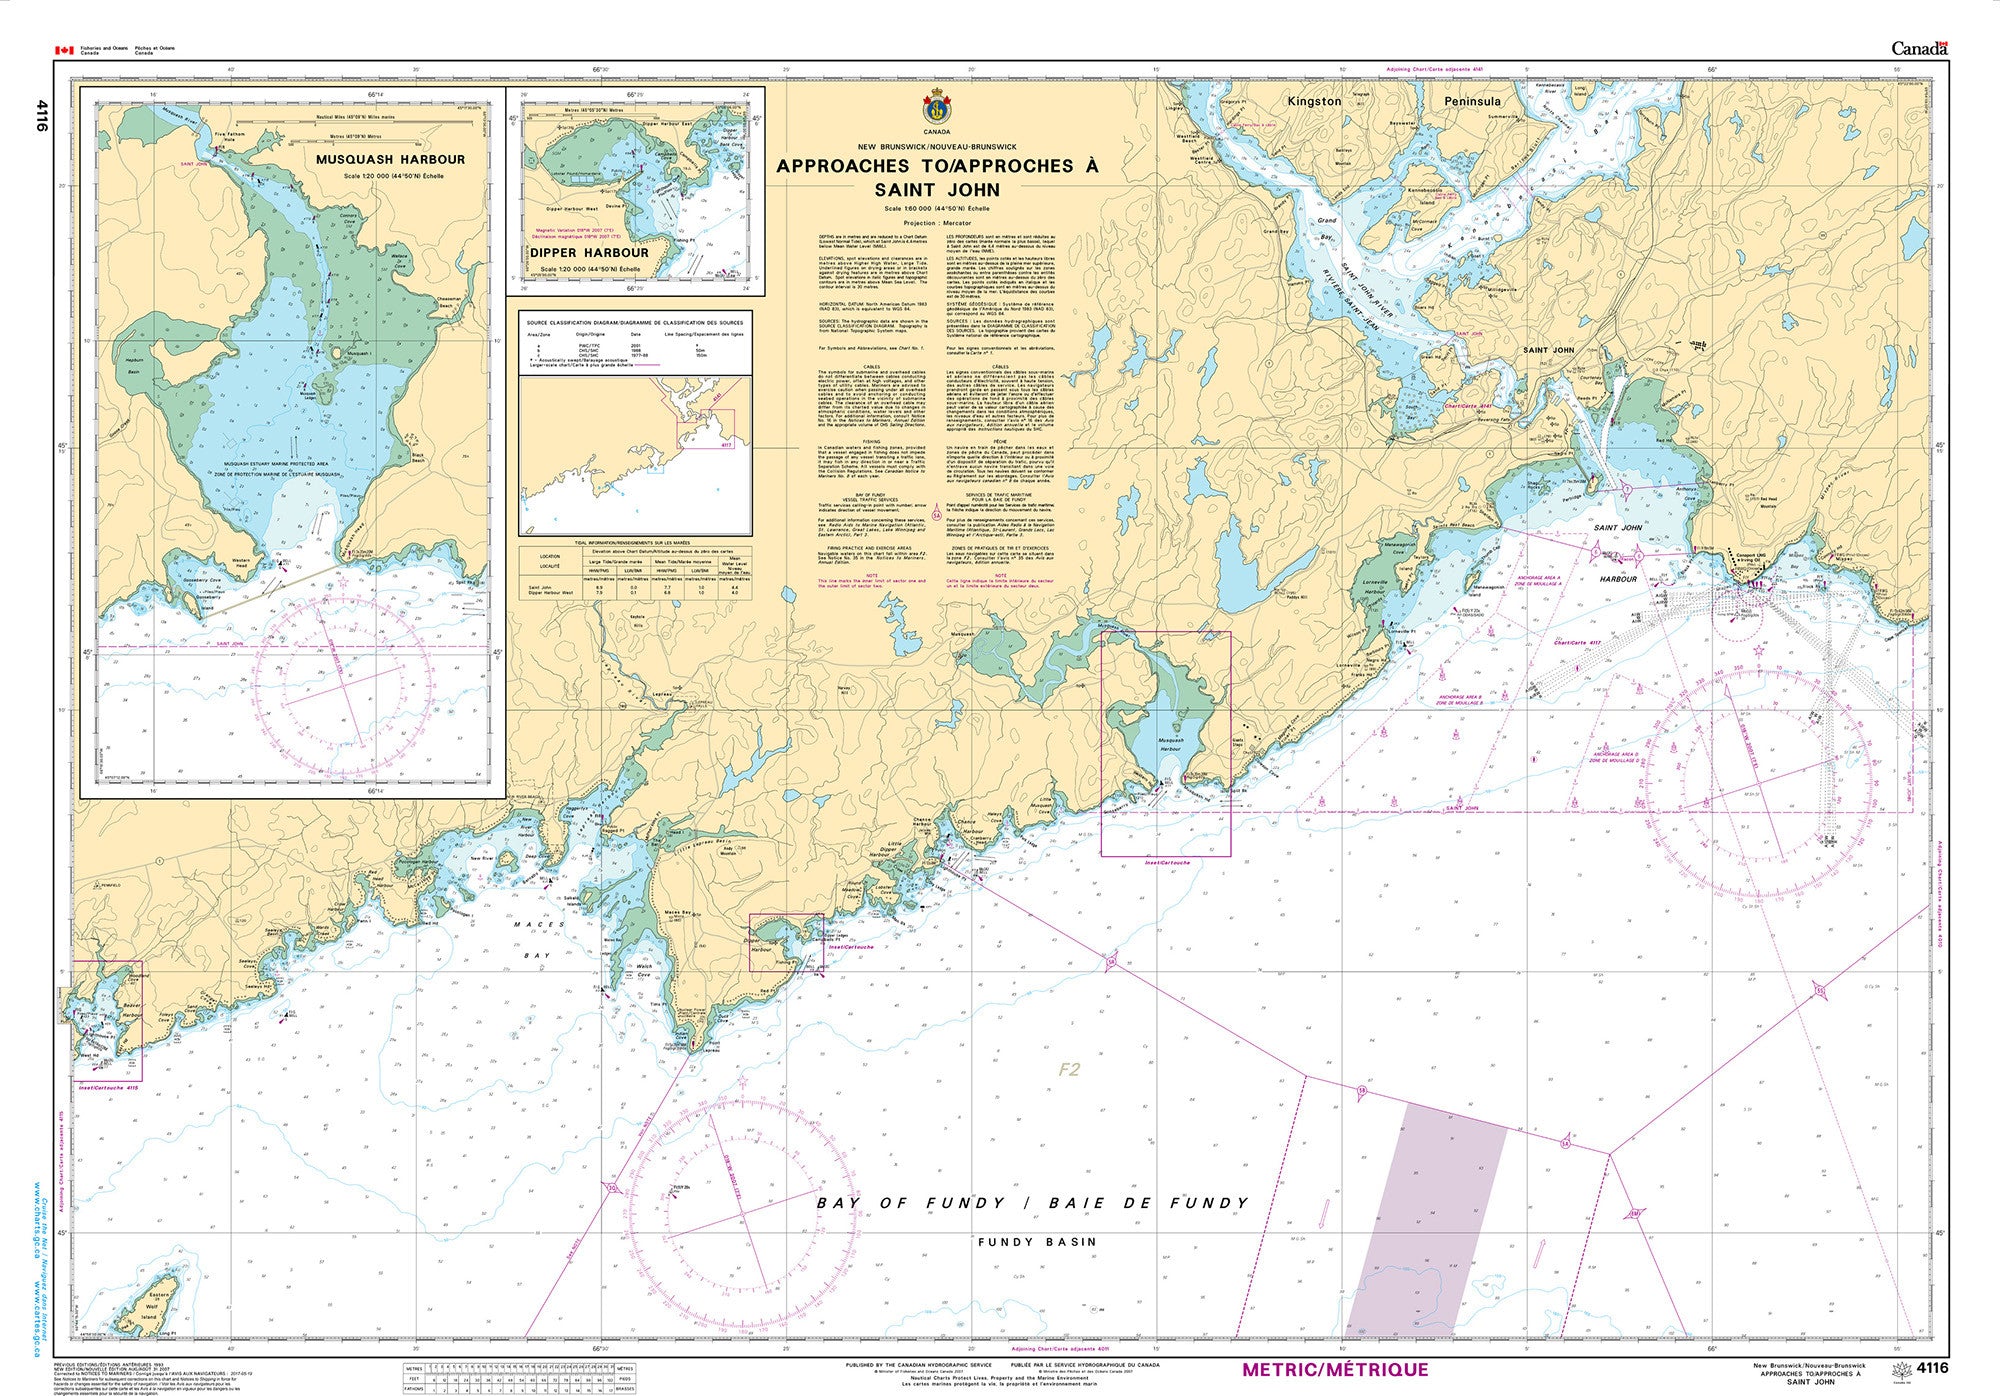 Canadian Hydrographic Service Nautical Chart CHS4116: Approaches to/Approches à Saint John